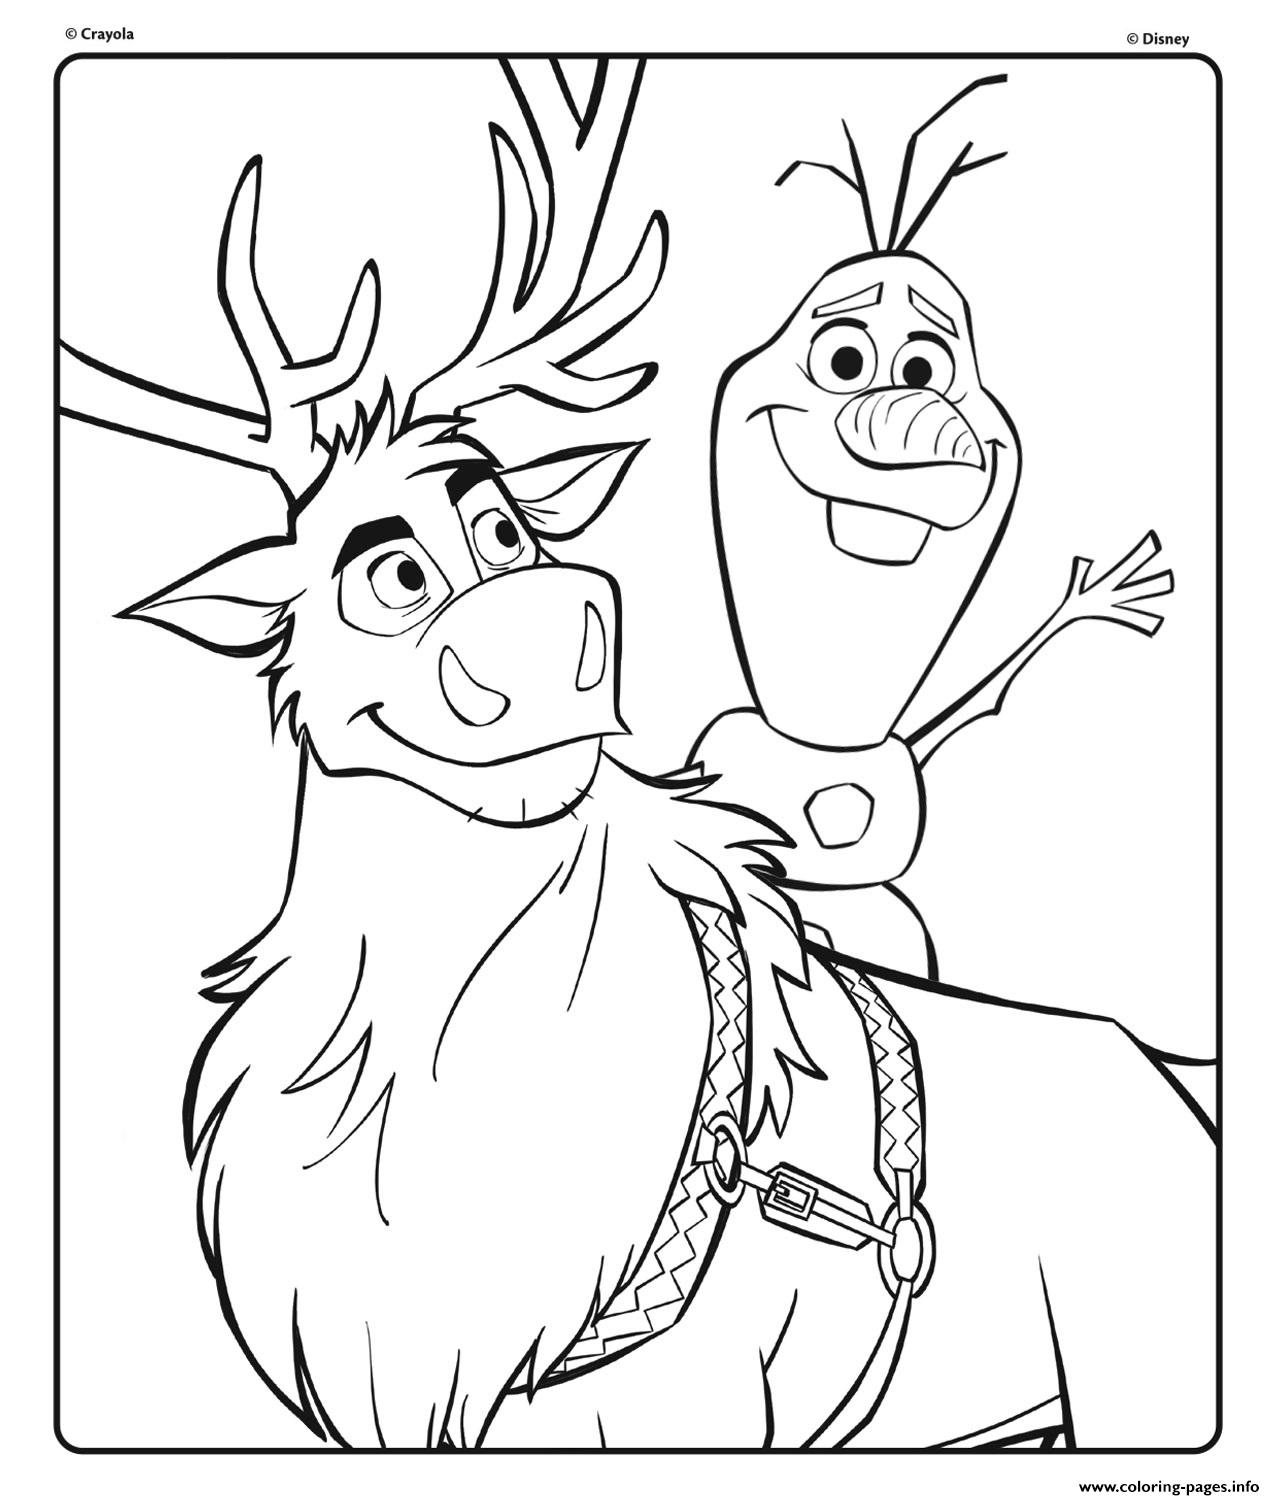 Olaf And Sven From Disney Frozen 2 Coloring Pages Printable